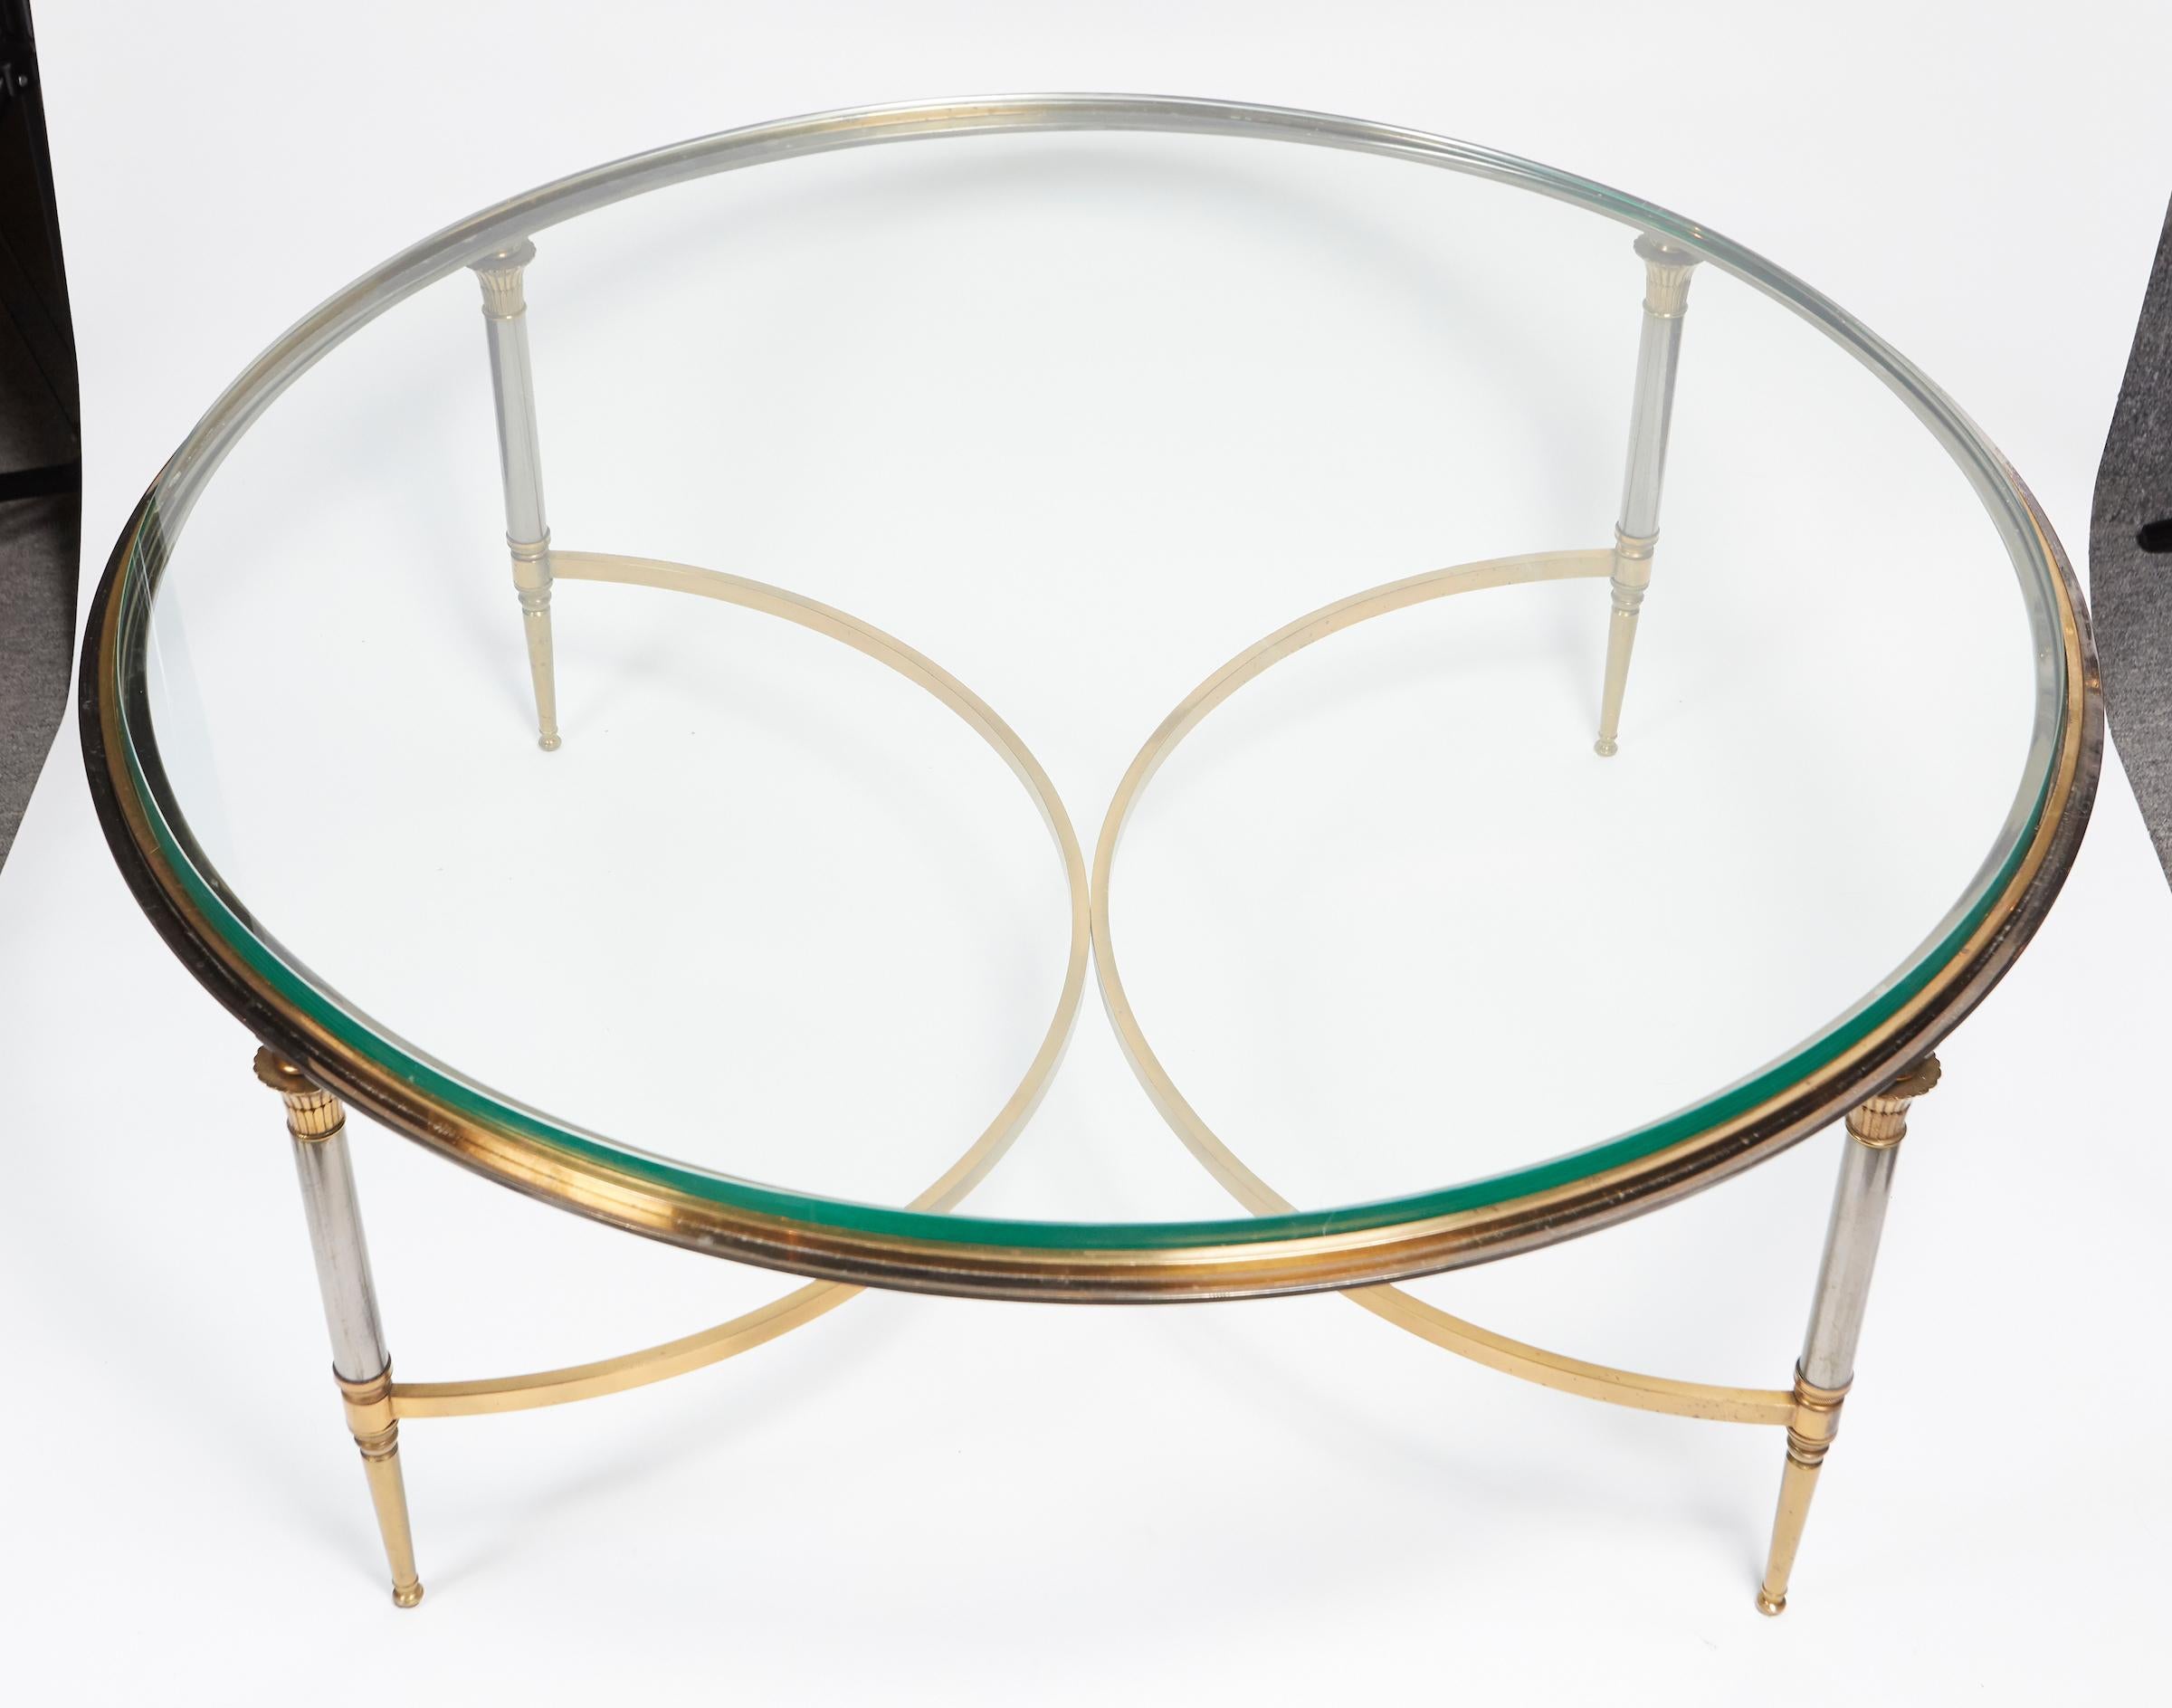 Brass and polished steal circular coffee table by Maison Jansen.